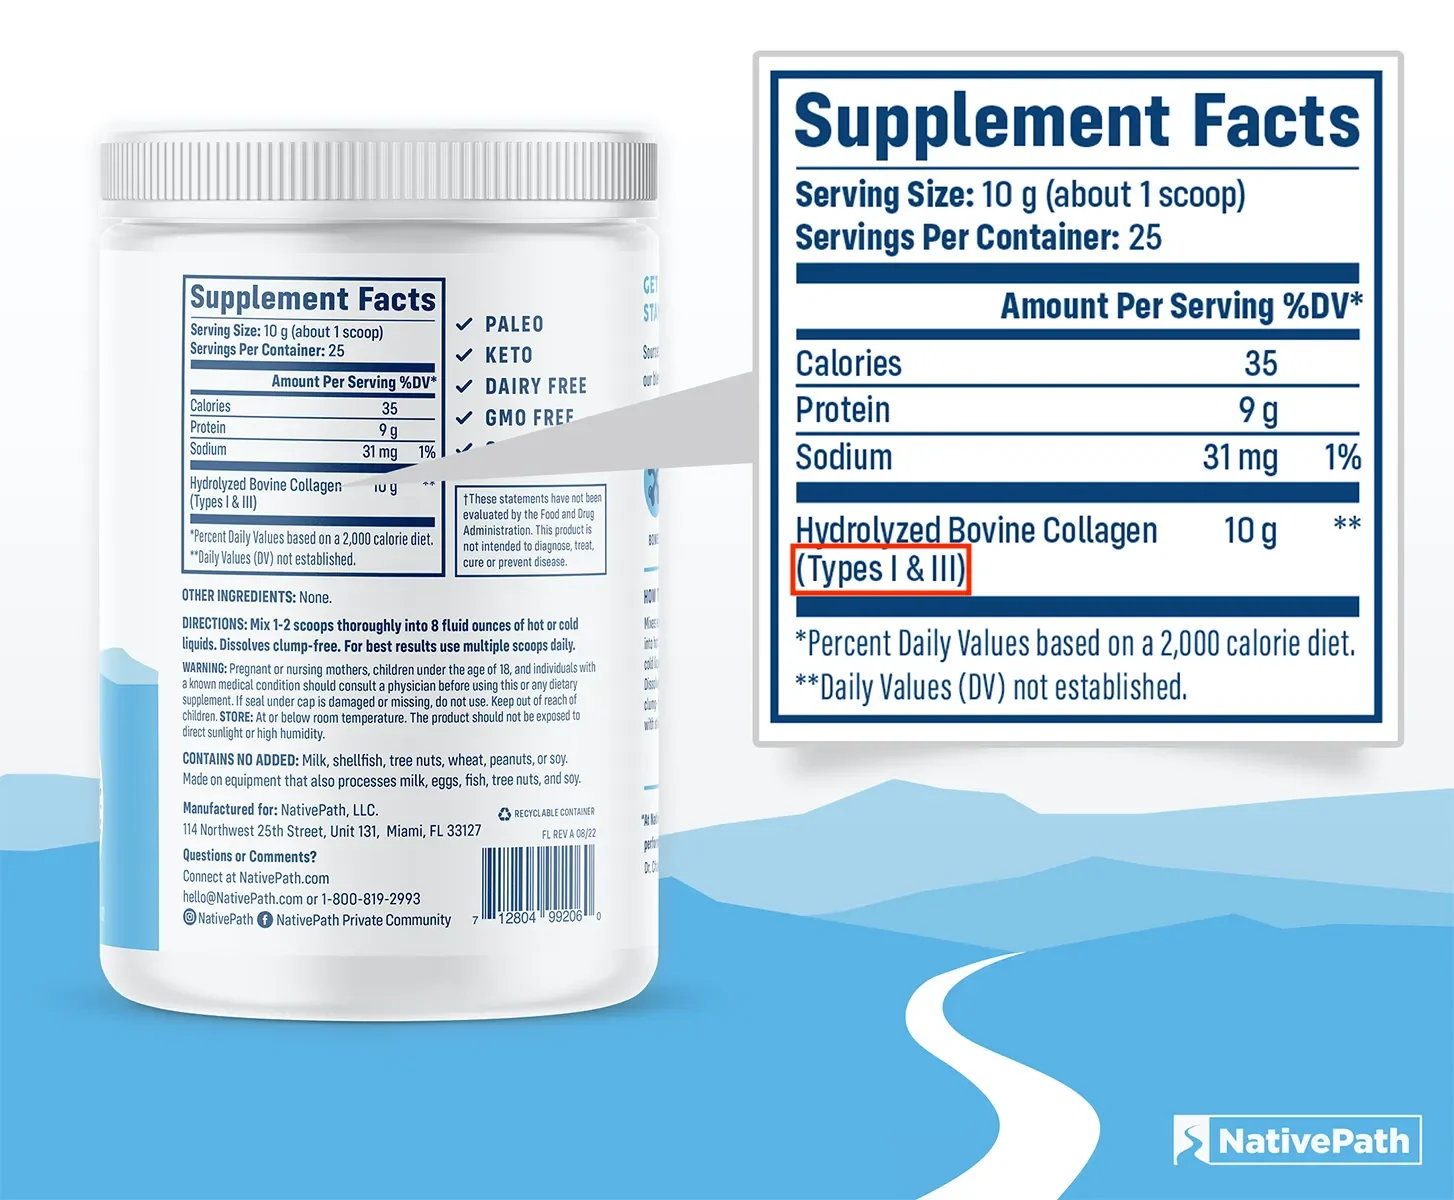 Supplement Facts label of NativePath Grass-Fed Collagen showing collagen types.